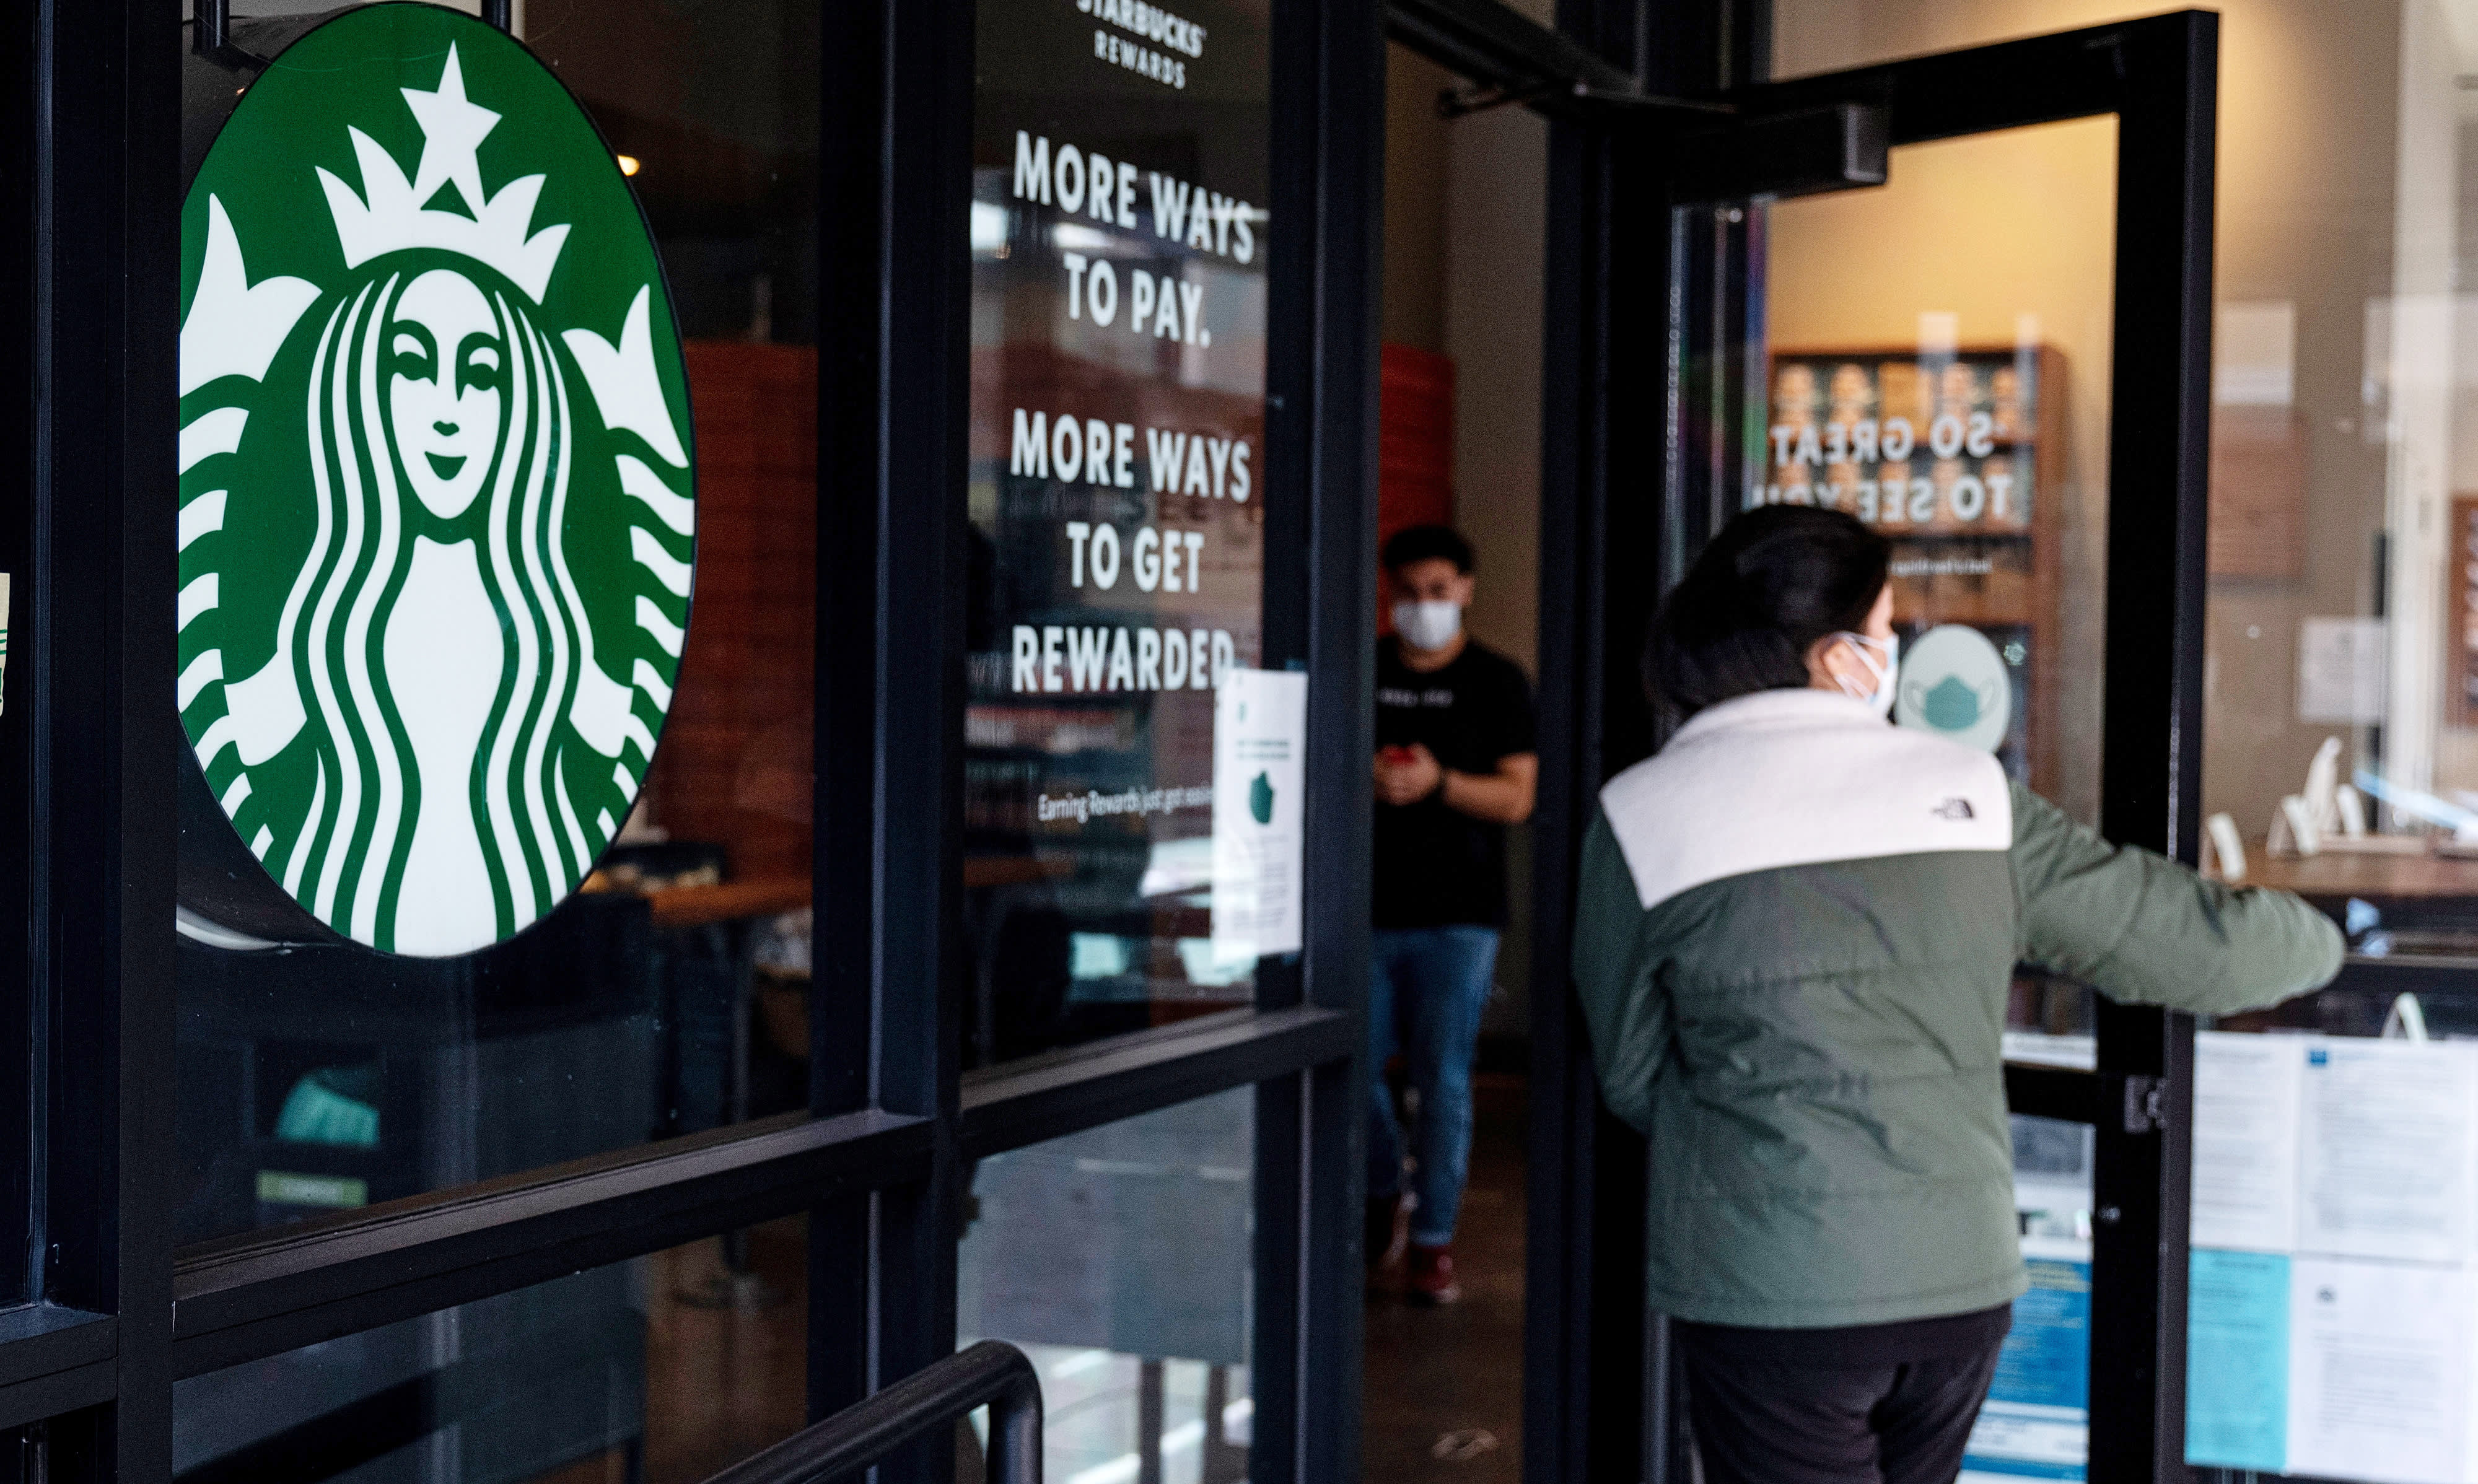 New Starbucks CEO has exactly the kind of consumer experience the coffee chain needs